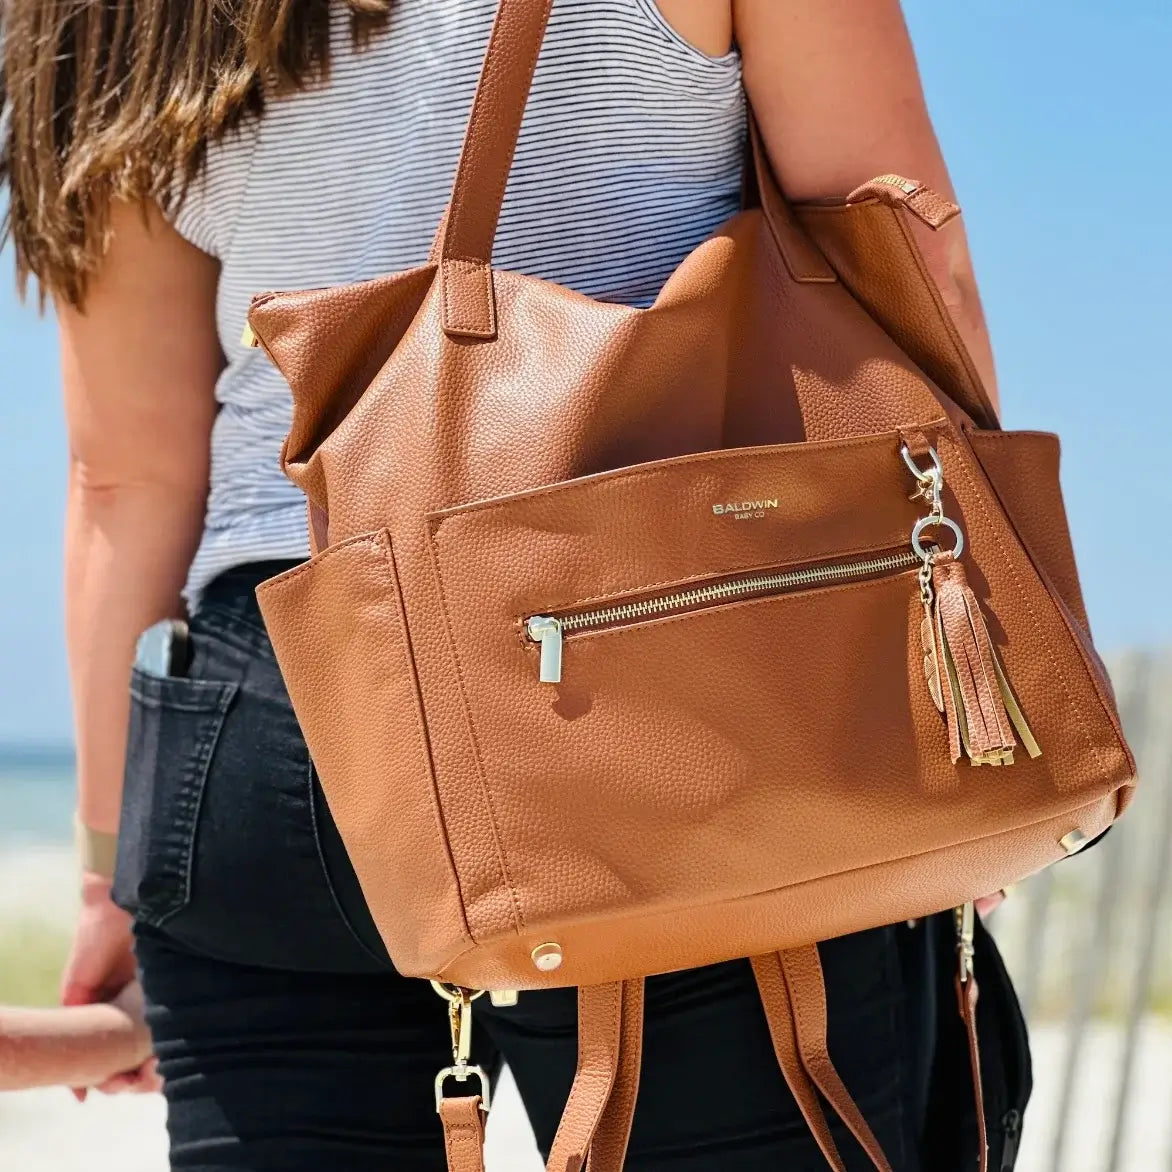 Woman on the beach wearing brown leather diaper bag with leather and gold feather tassel by the shoulder straps